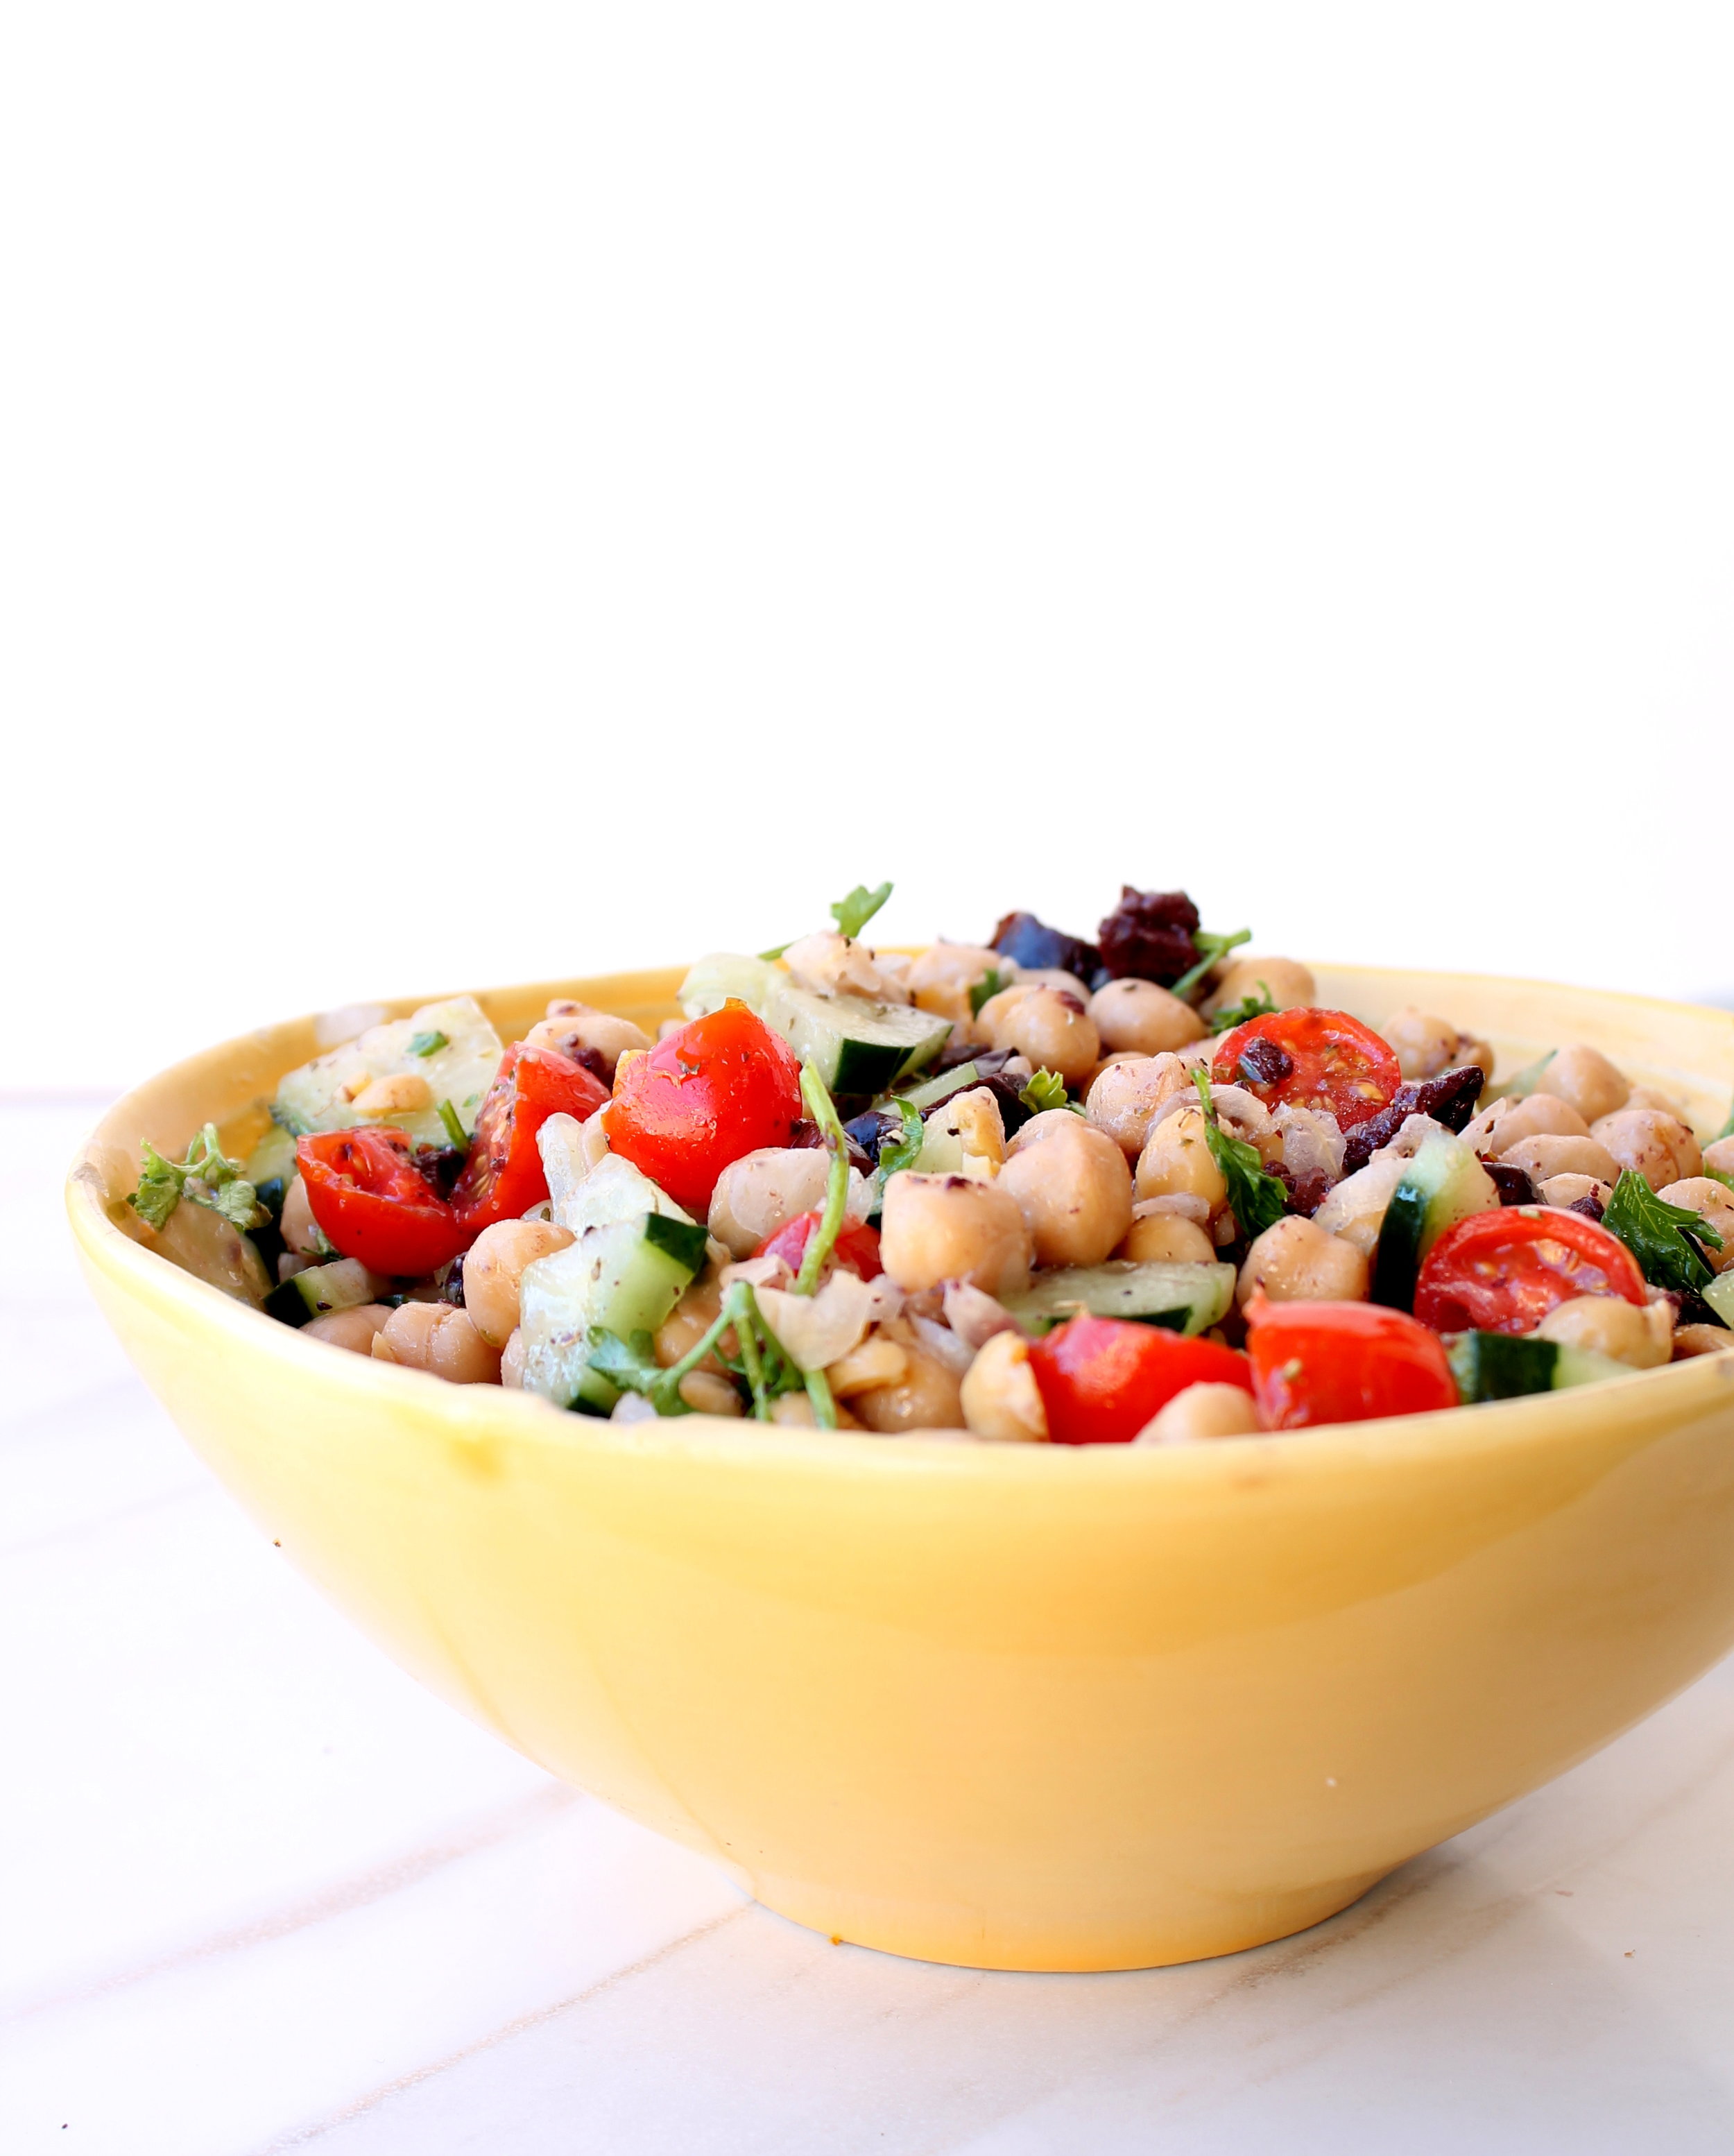 Lunchbox Chickpea Salad is naturally gluten-free, vegan, and very flexible. It requires a bowl, 10 minutes, and you will have lunch for days!